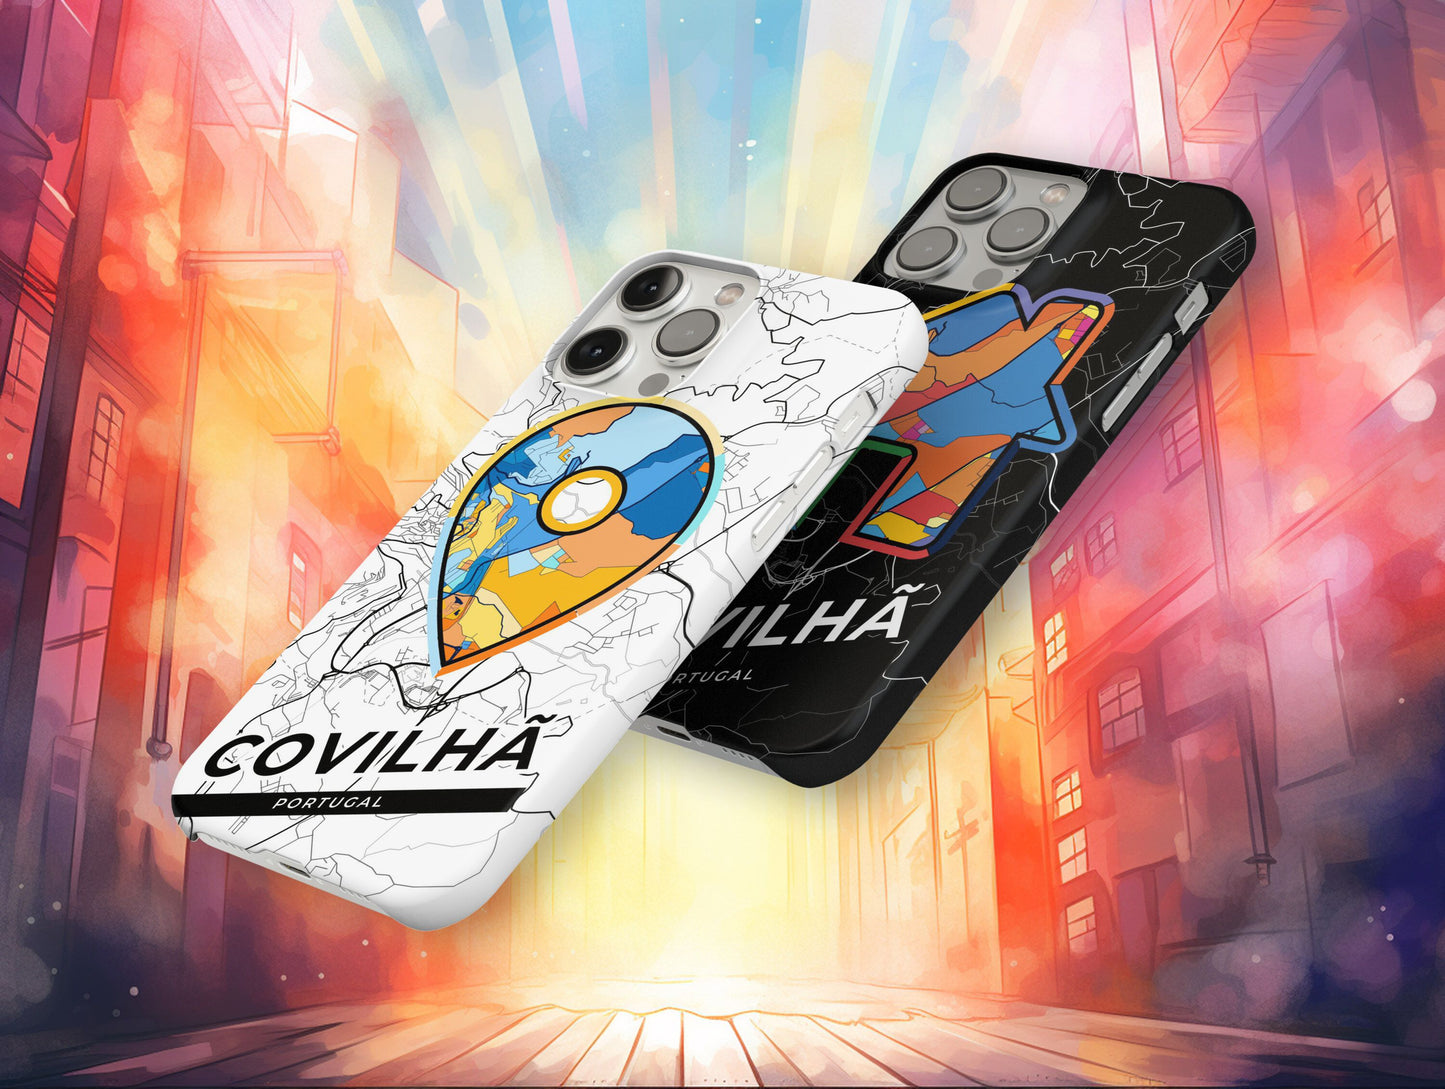 Covilhã Portugal slim phone case with colorful icon. Birthday, wedding or housewarming gift. Couple match cases.